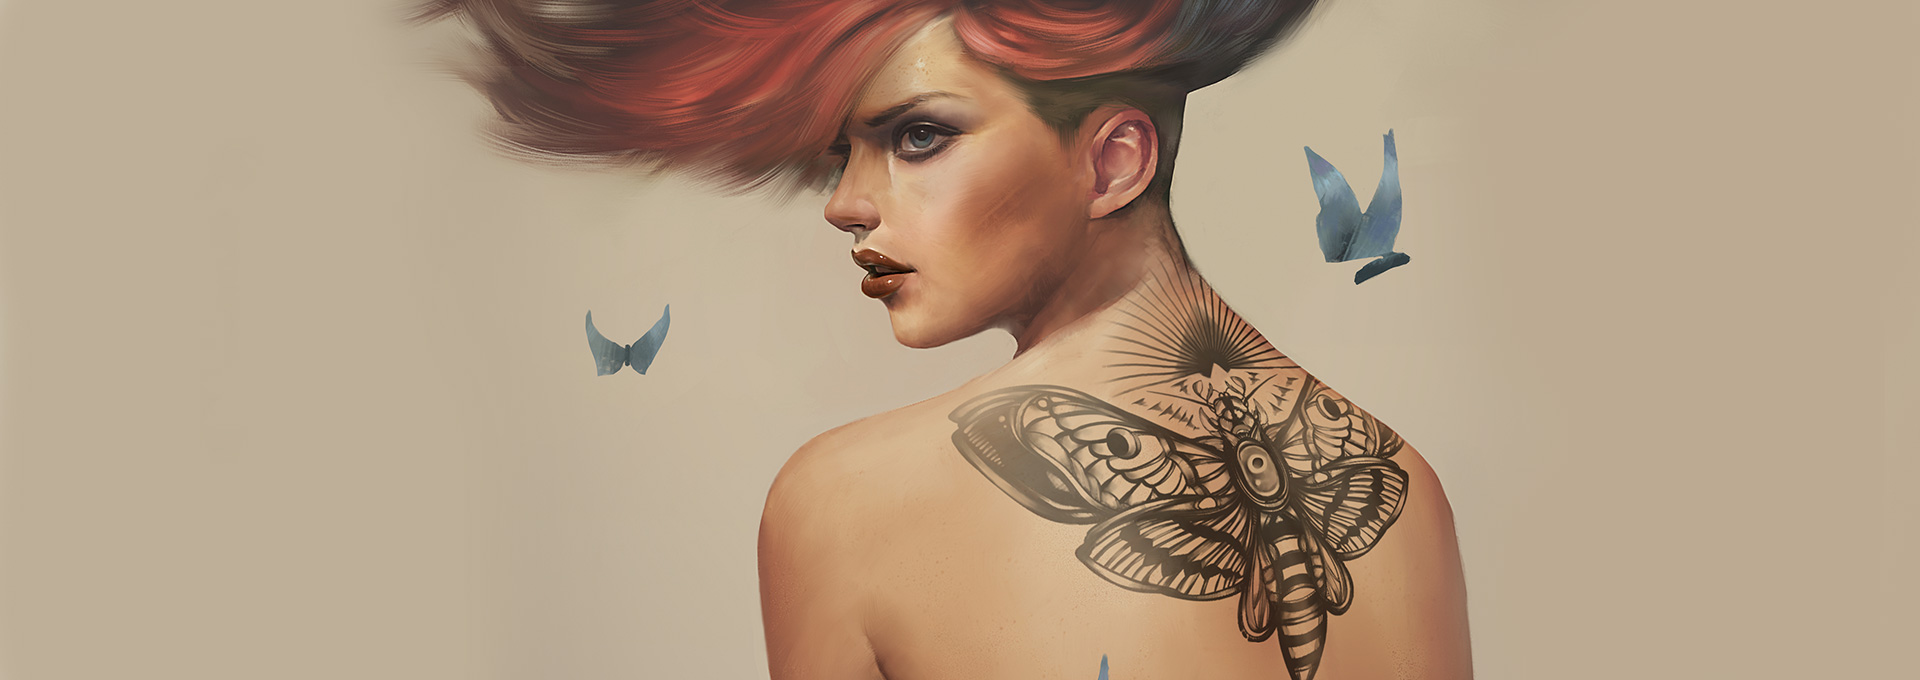 How to Paint Tattoos to your Digital Paintings